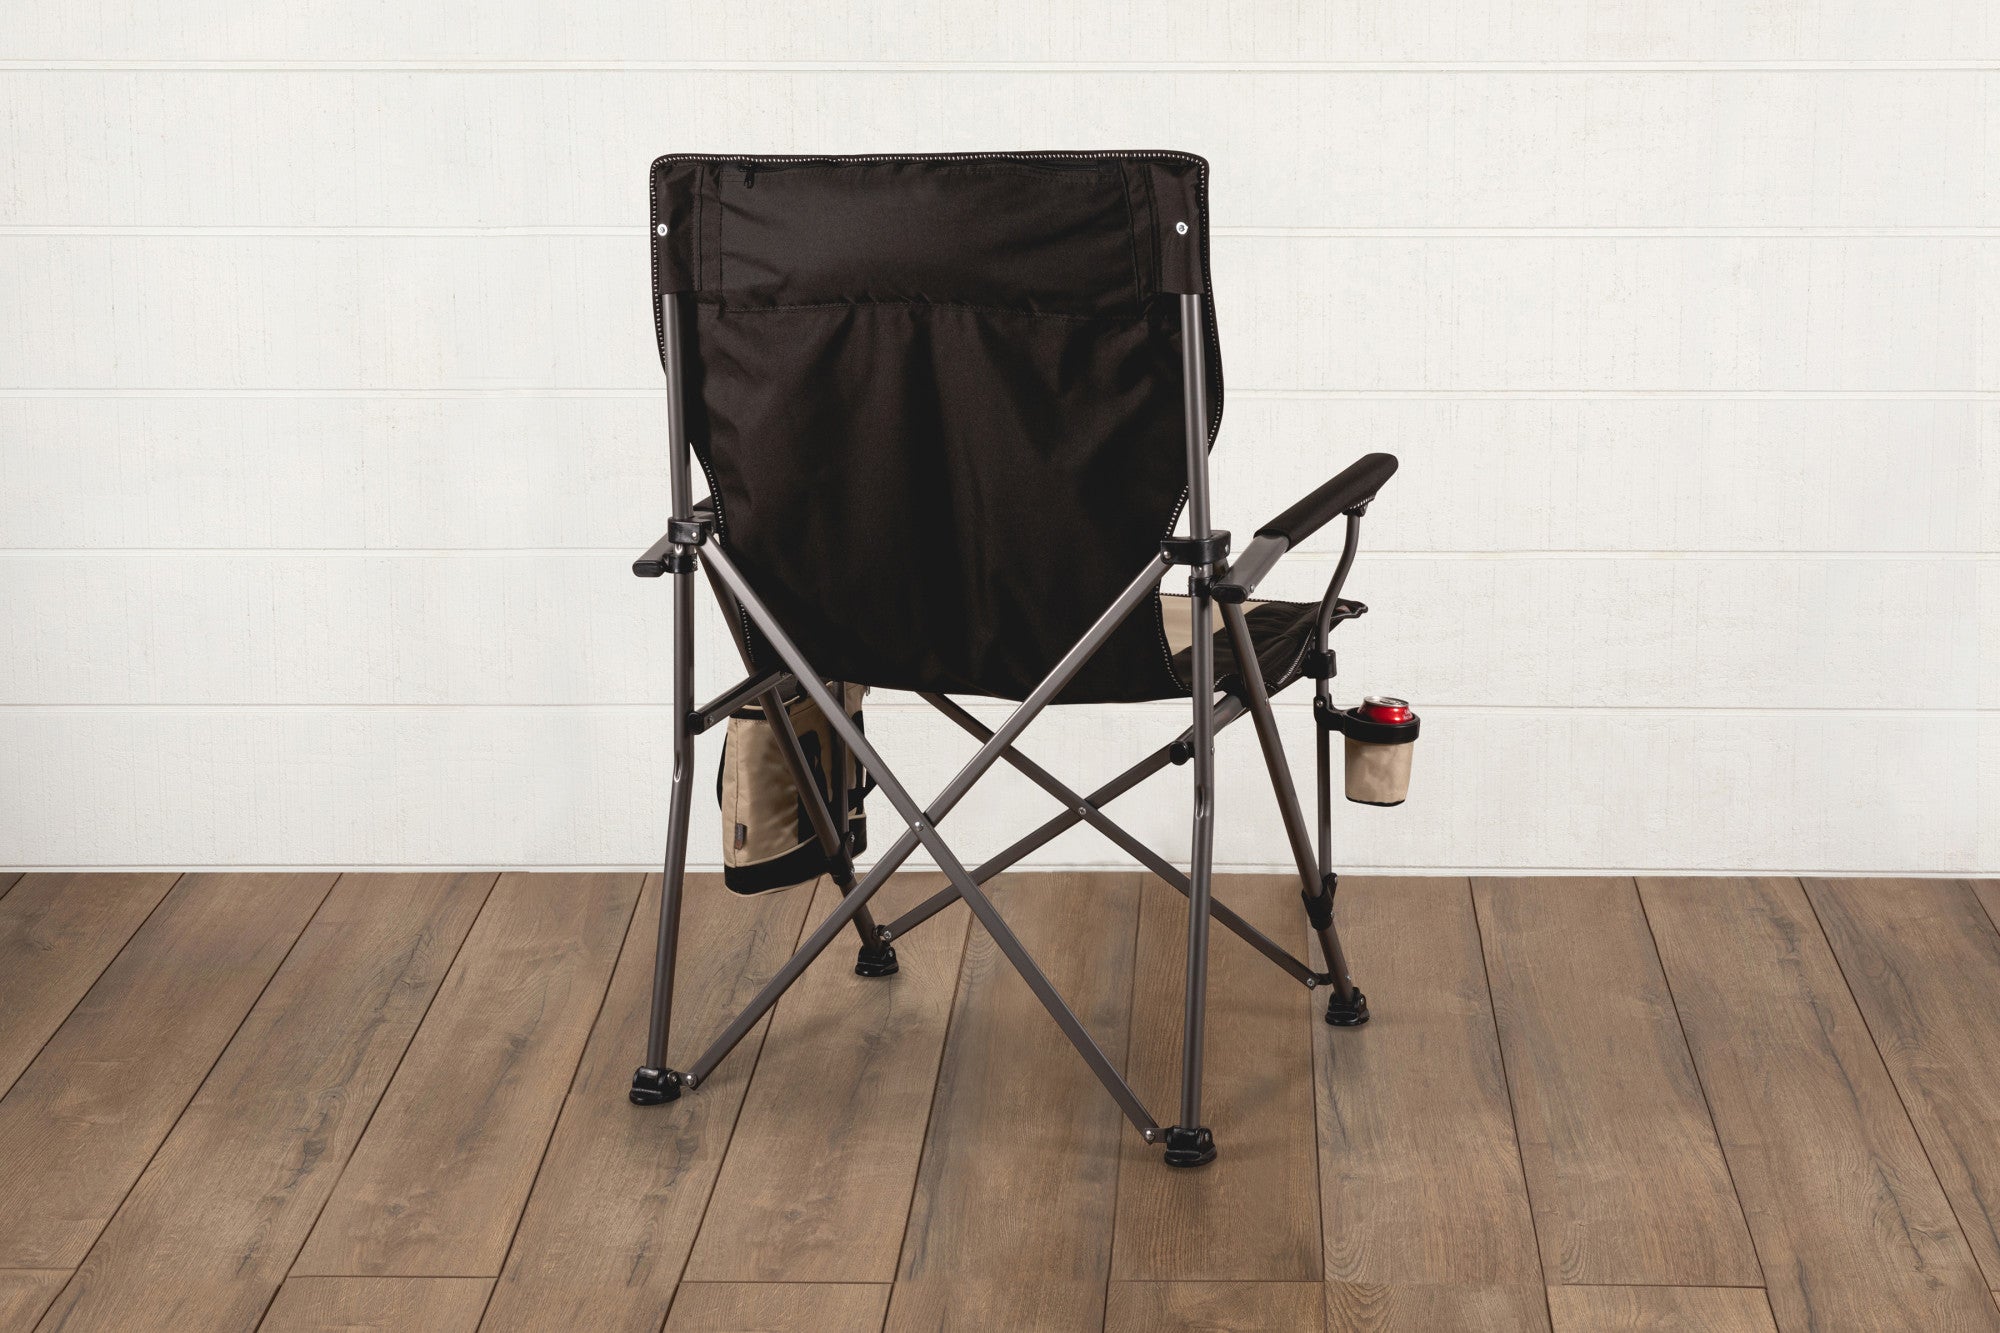 New York Jets - Big Bear XXL Camping Chair with Cooler